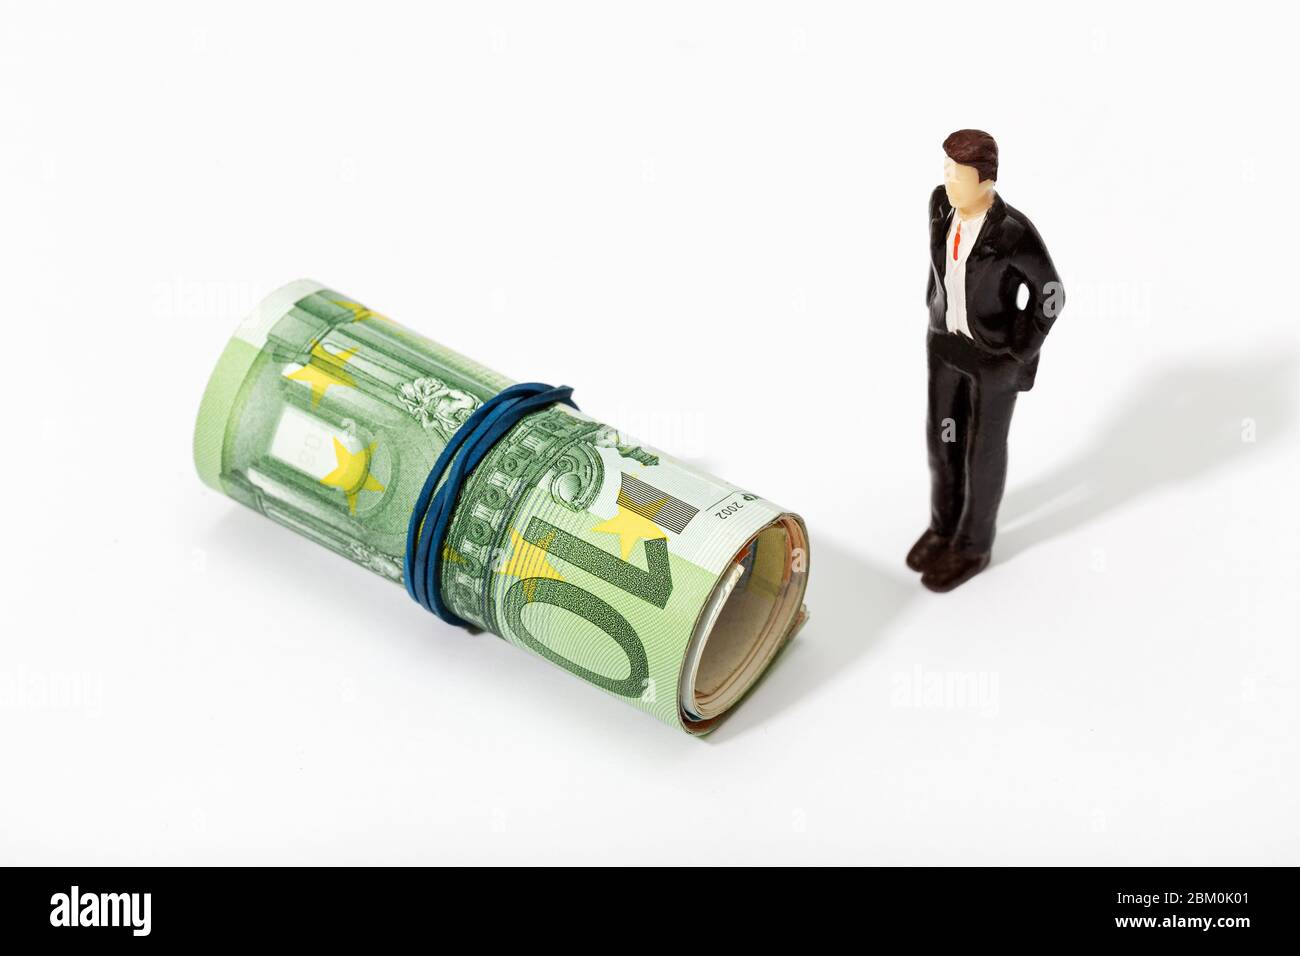 Human representation of a man looking at a Roll of money. Finance, investment or savings concept Stock Photo